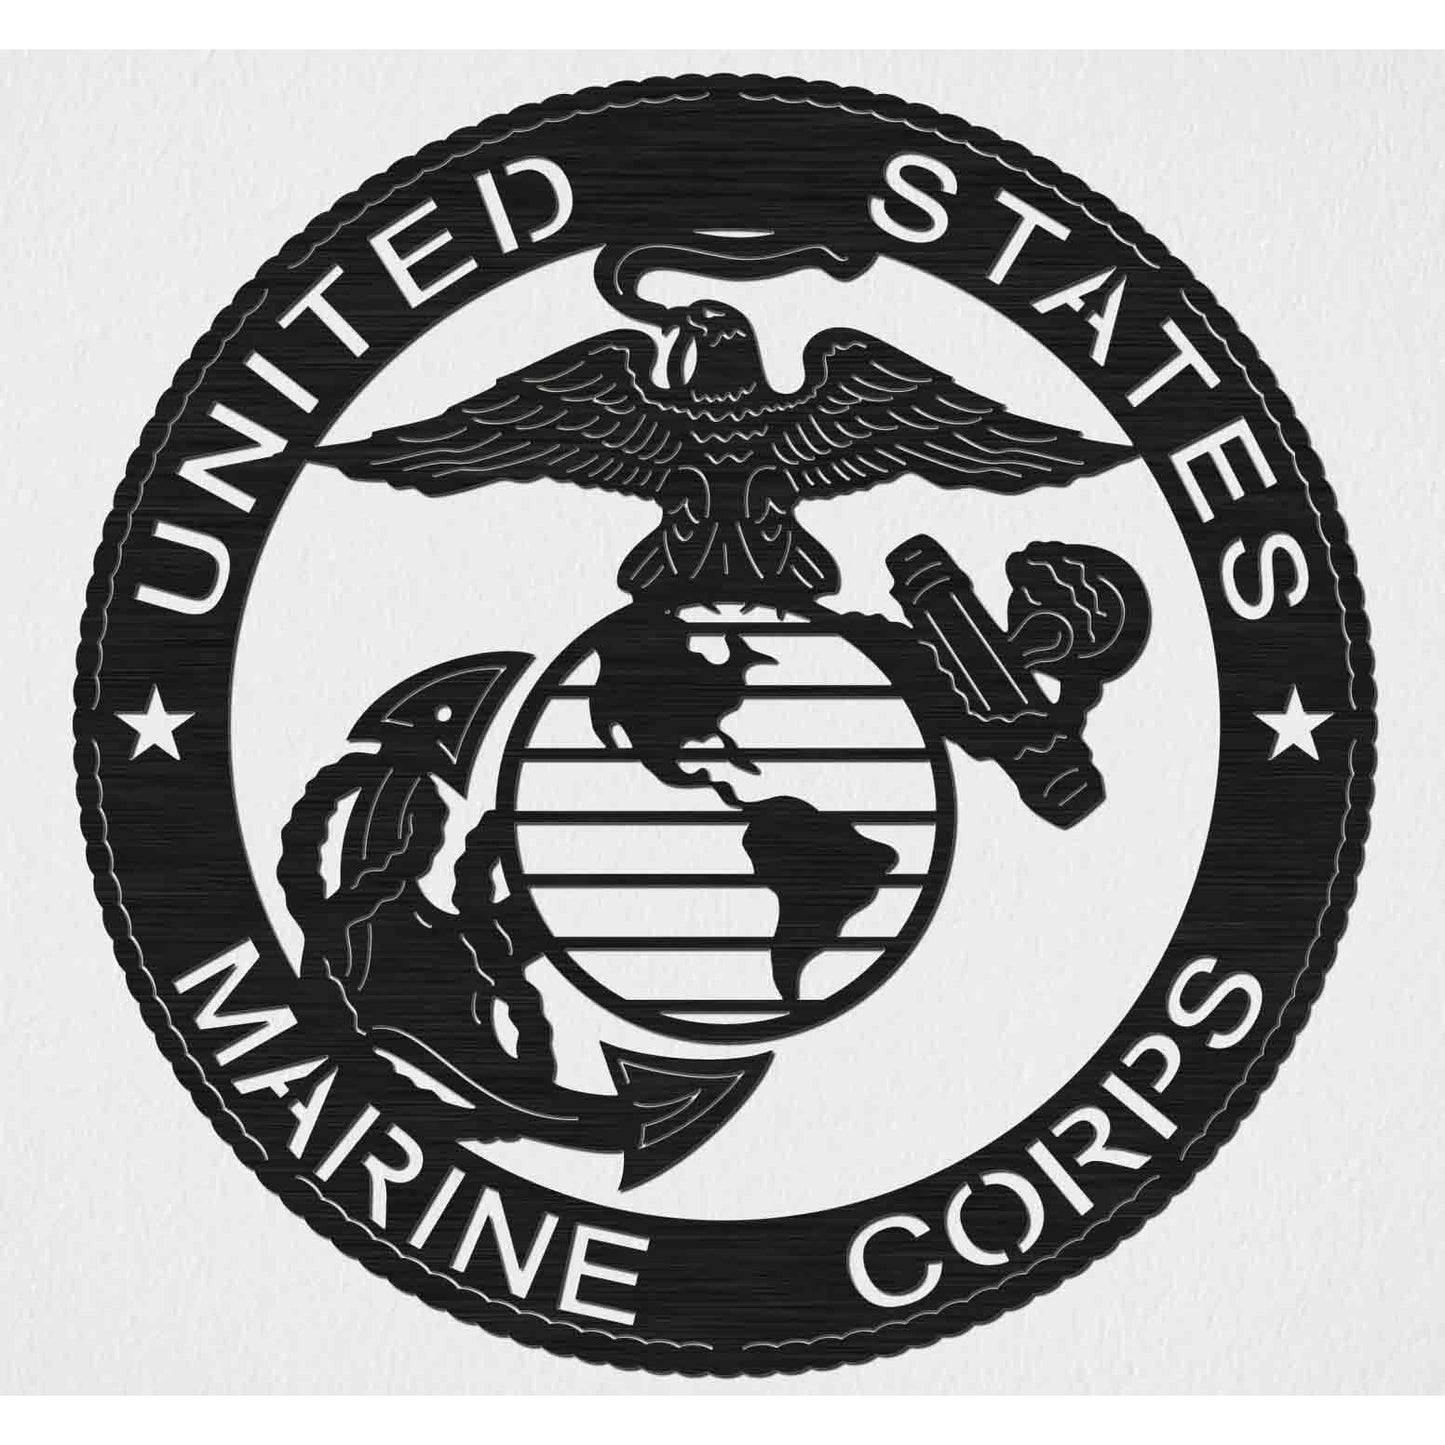 US Marine Corps with Eagle, Earth and Anchor Badge - DXF files Cut Ready CNC Designs -DXFforCNC.com 